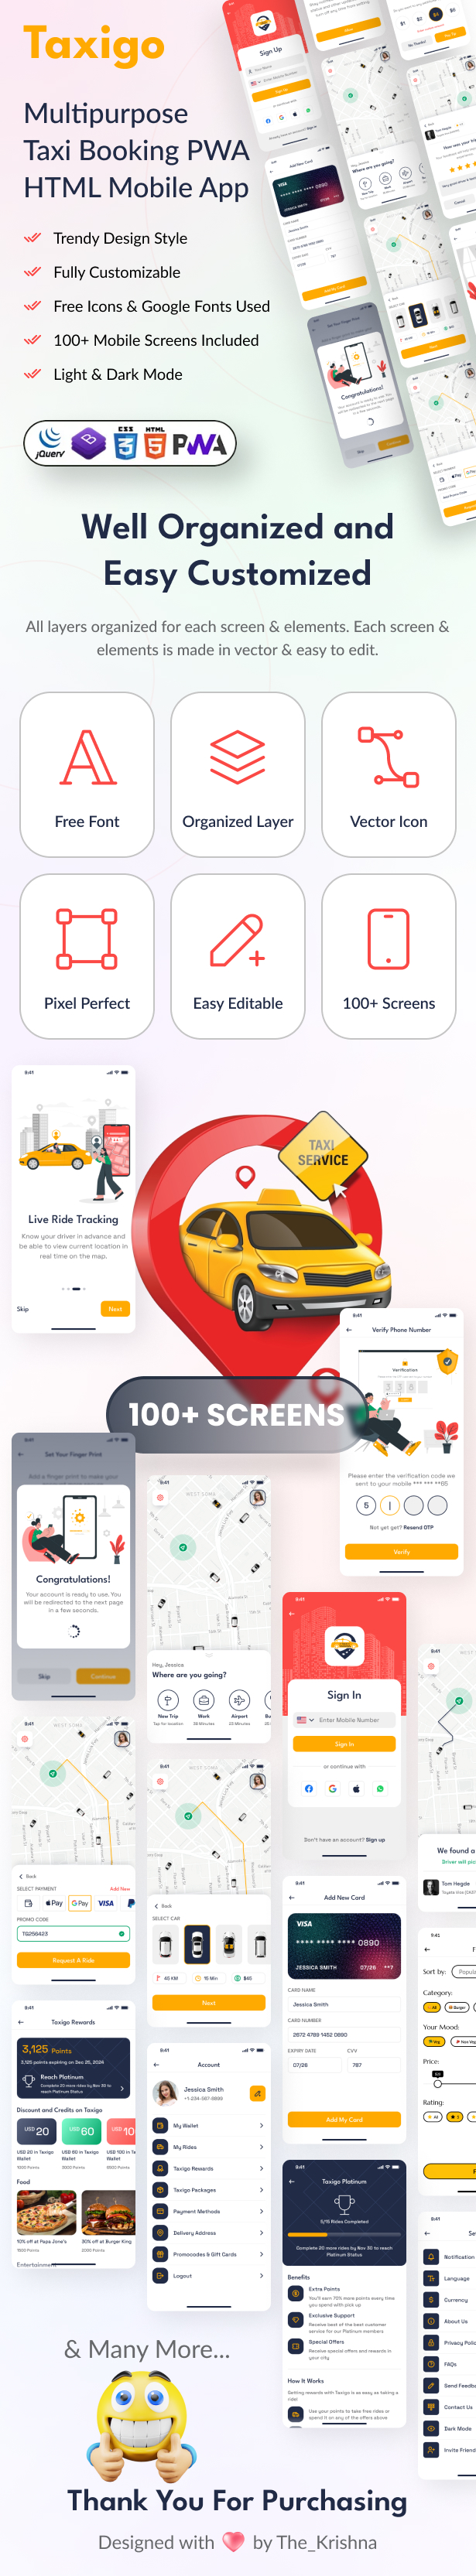 Car Rental and Taxi Booking Mobile App PWA HTML Template - Taxigo - 3